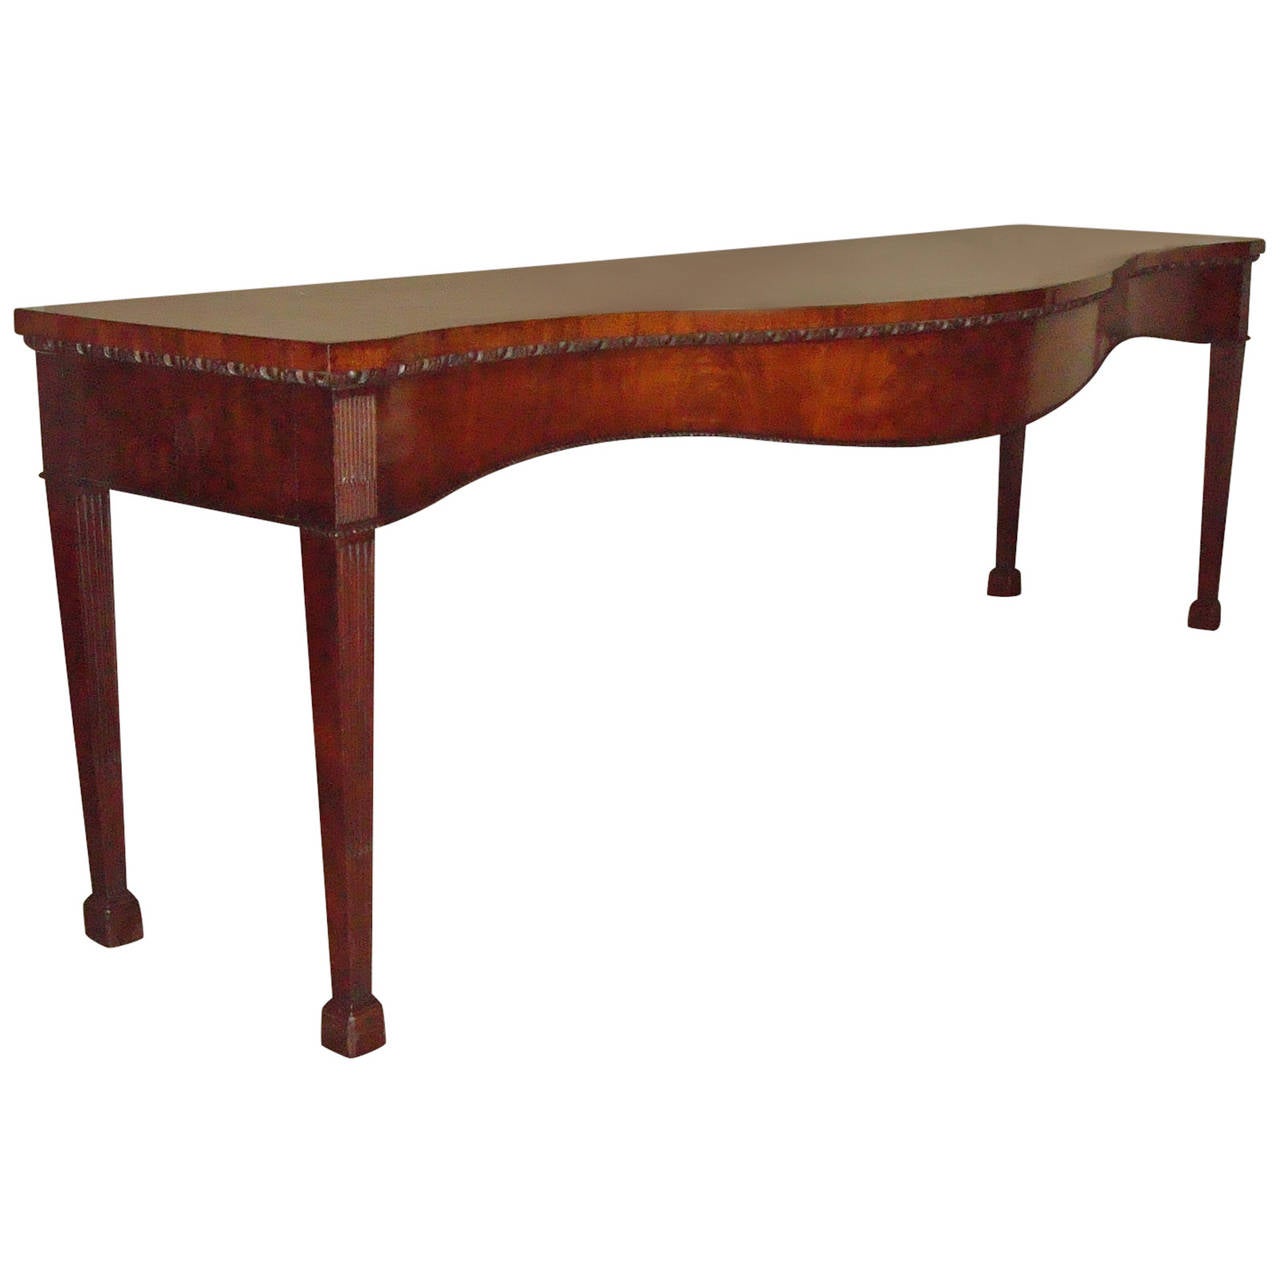 An exceptional George III mahogany, serpentine serving/side table of monumental proportions; the figured mahogany top with an exaggerated serpentine front, but the whole still retaining desirable shallow form, with a finely carved egg and dart